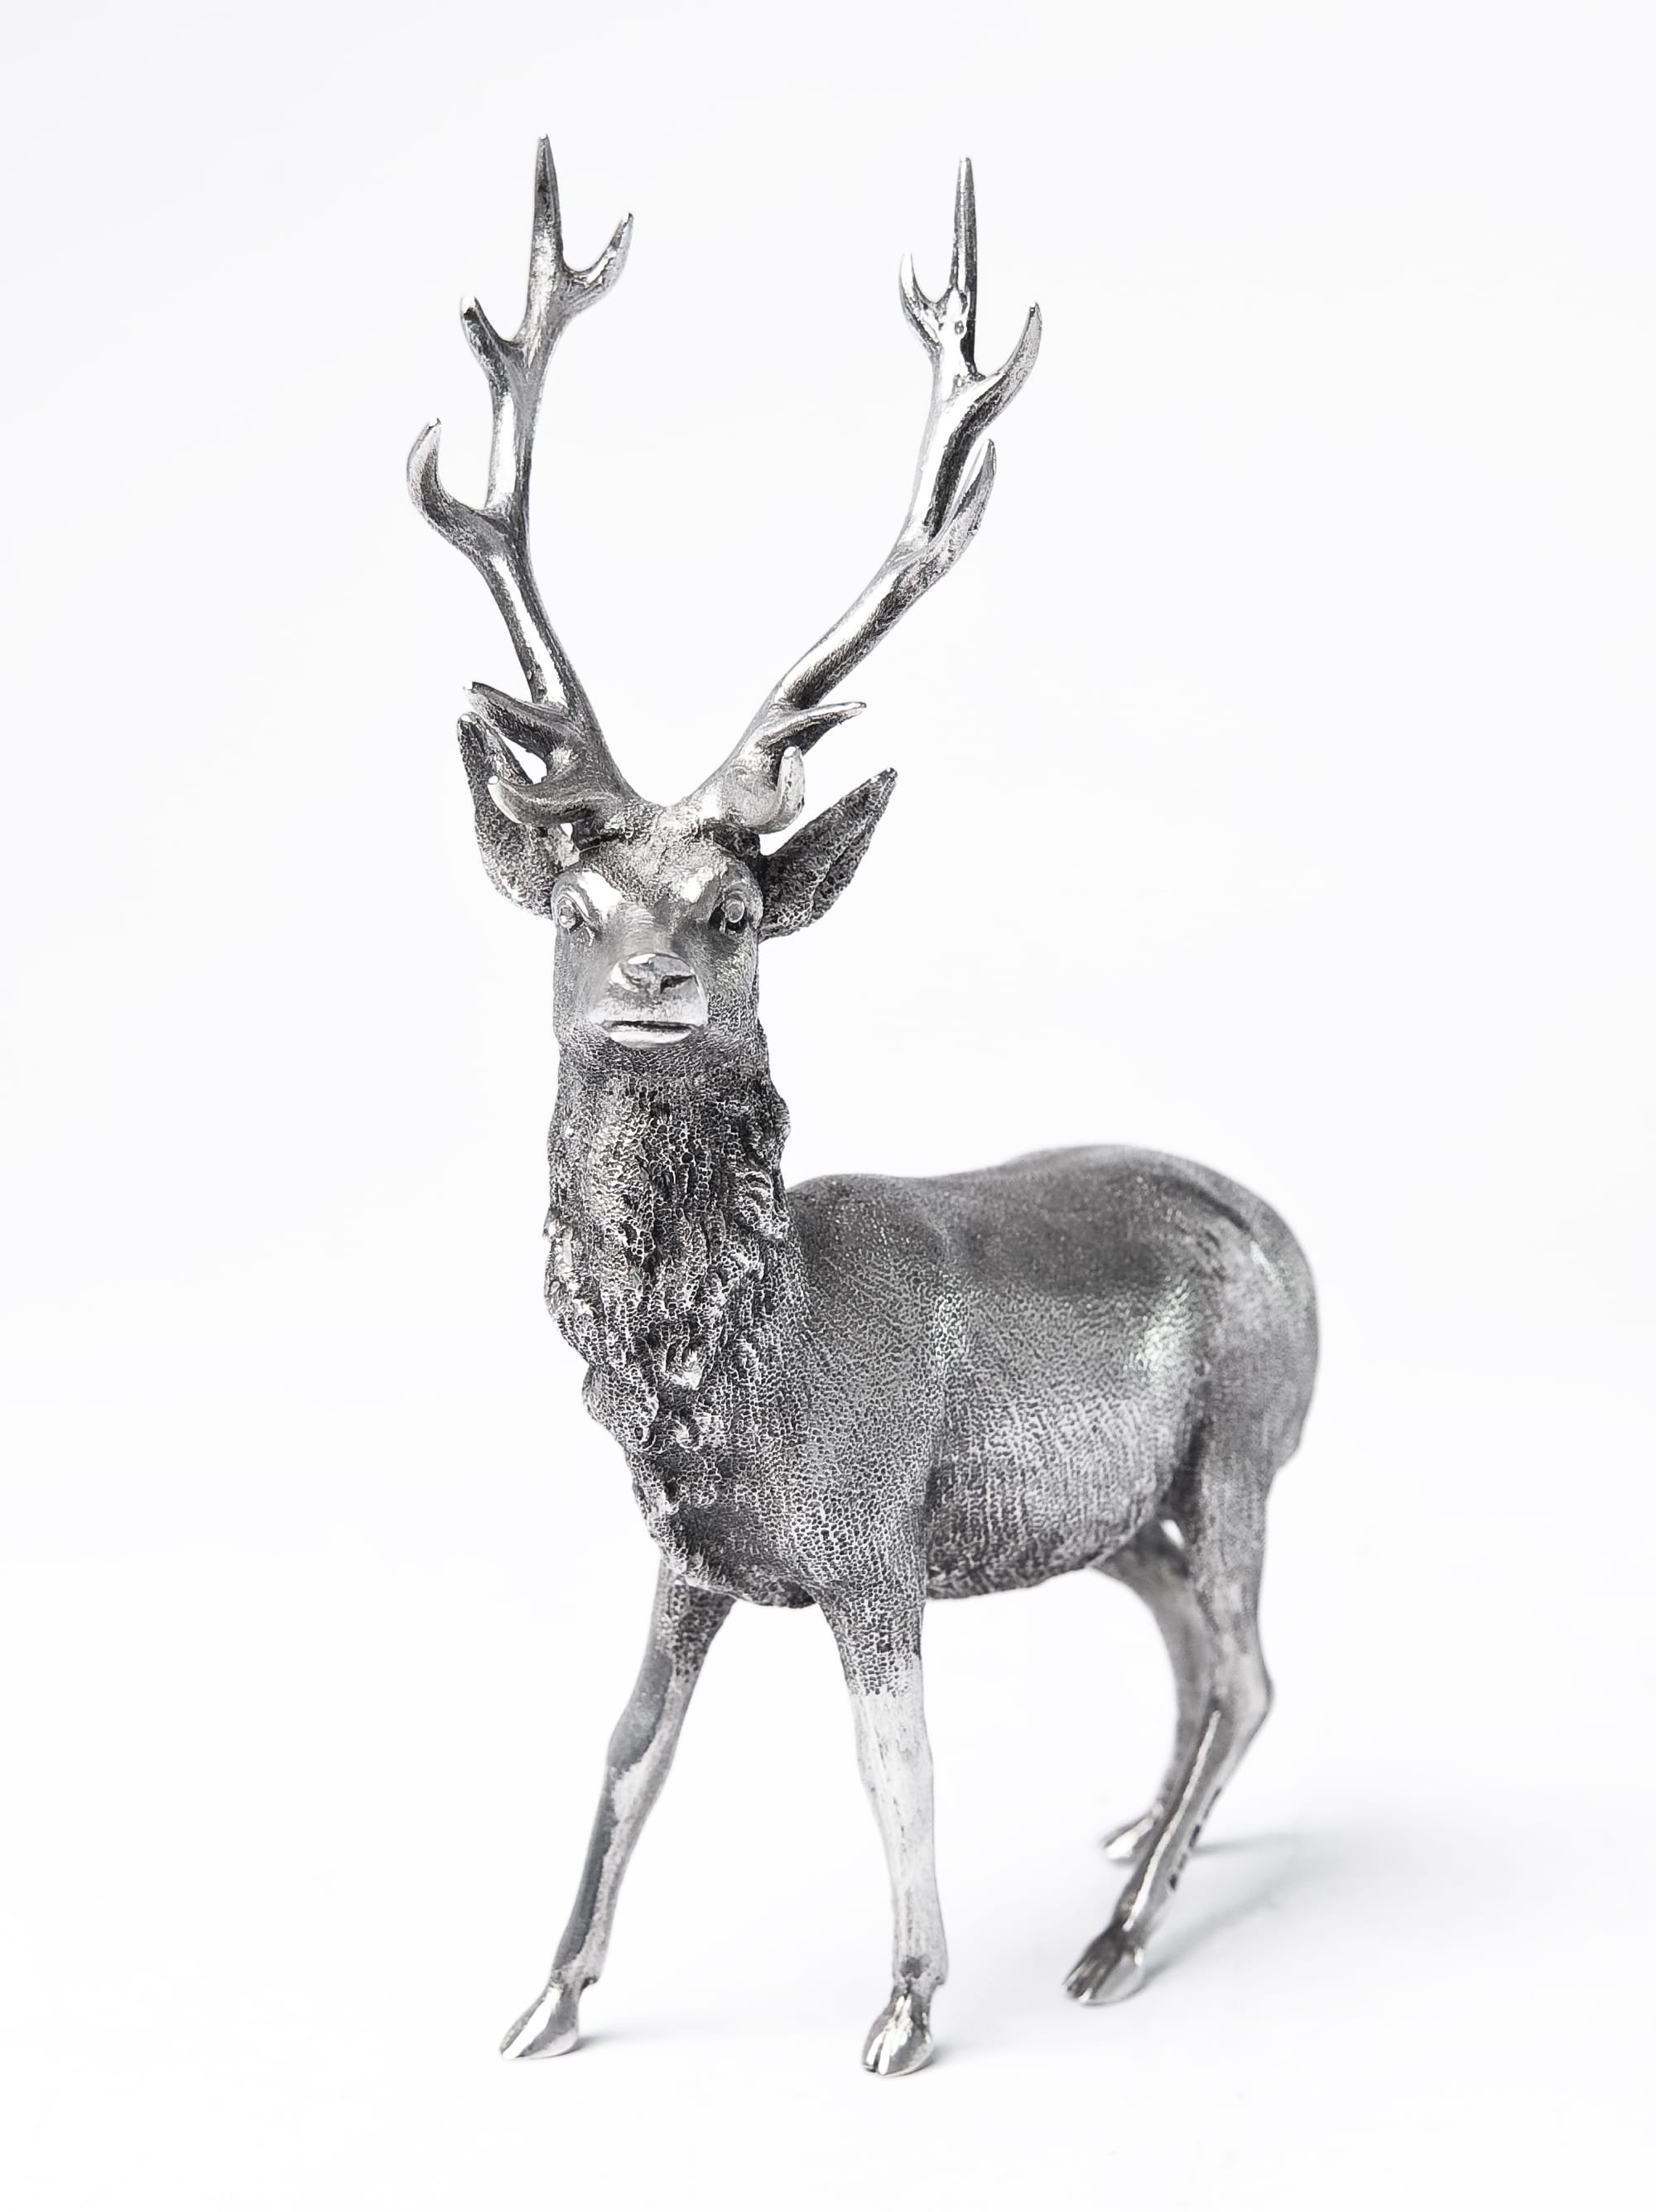 Model stag commission